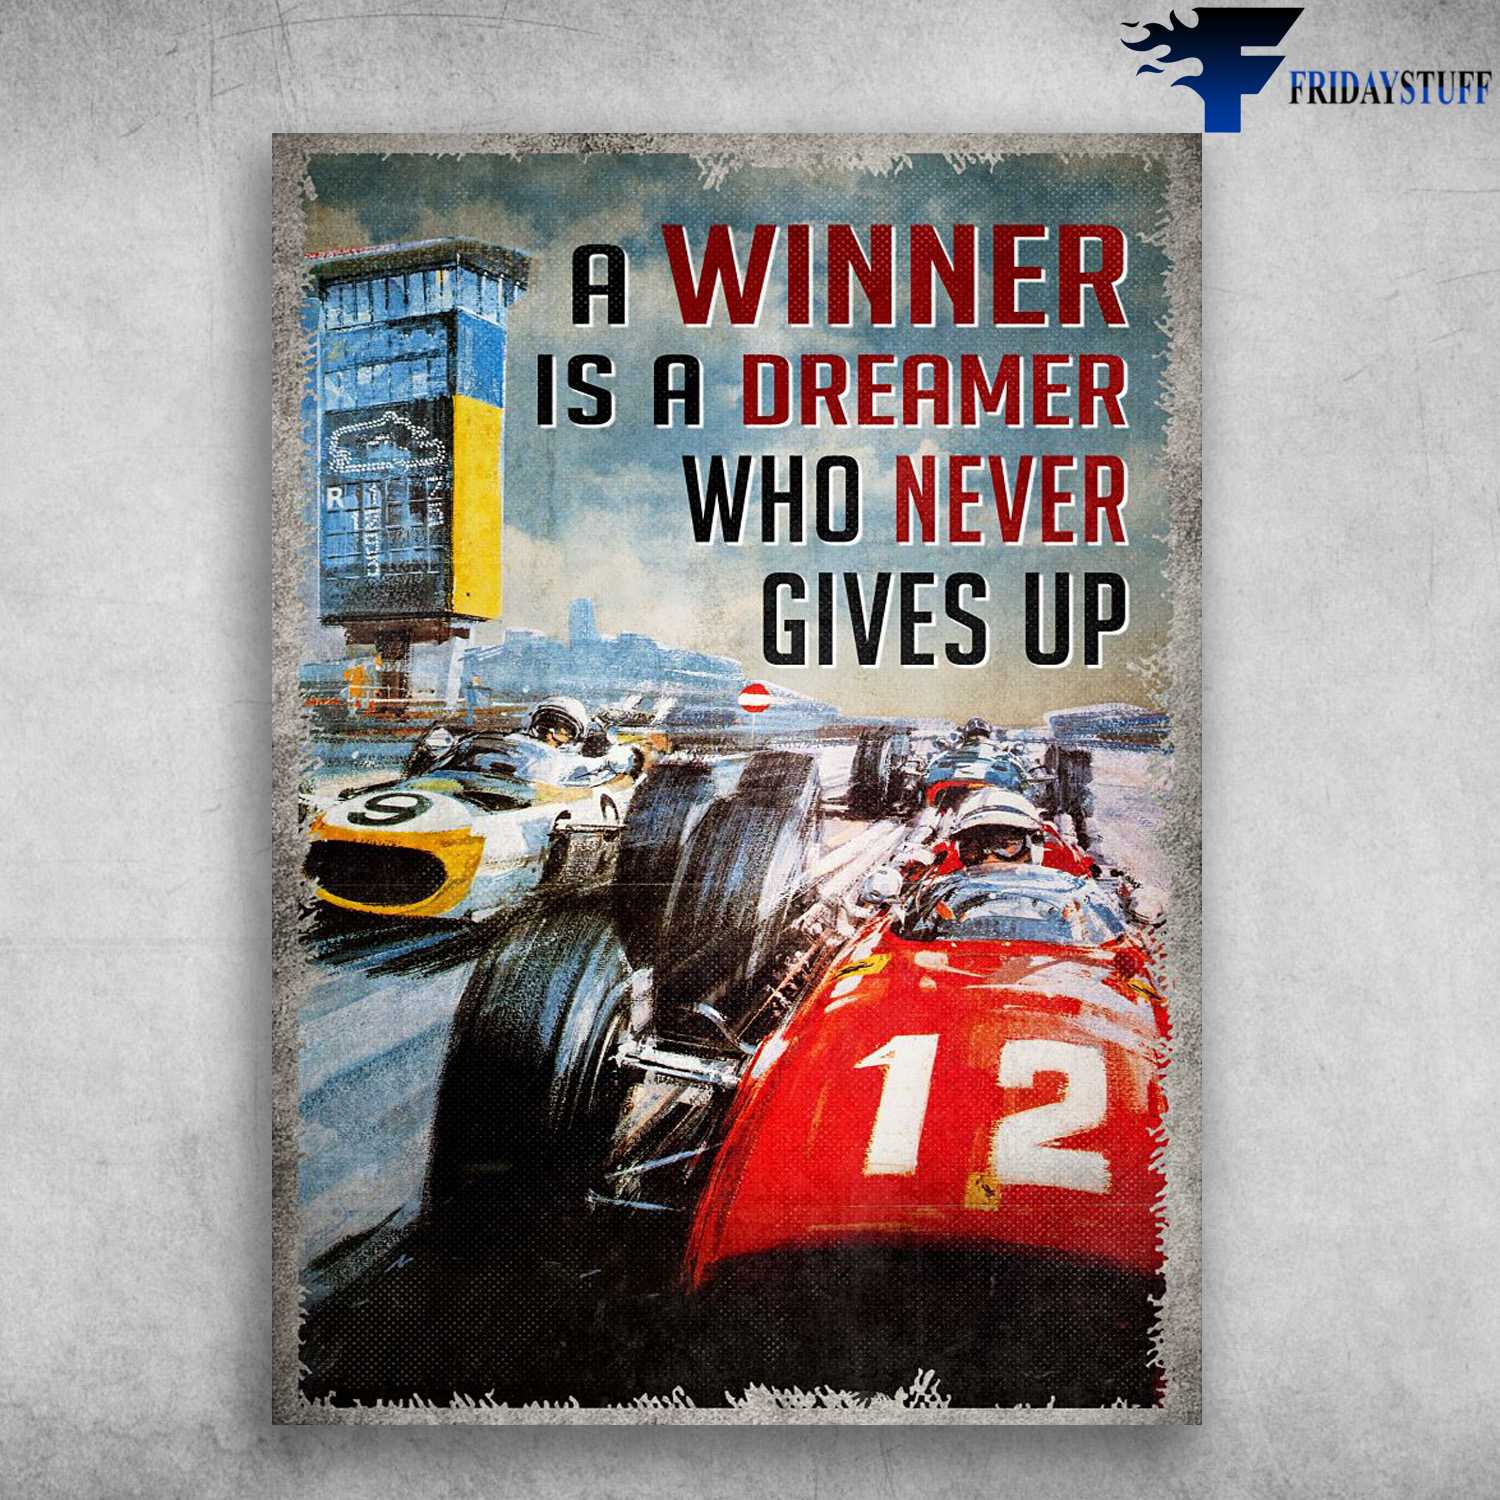 Racing Car - A Winner Is A Dreamer, Who Never Gives Up